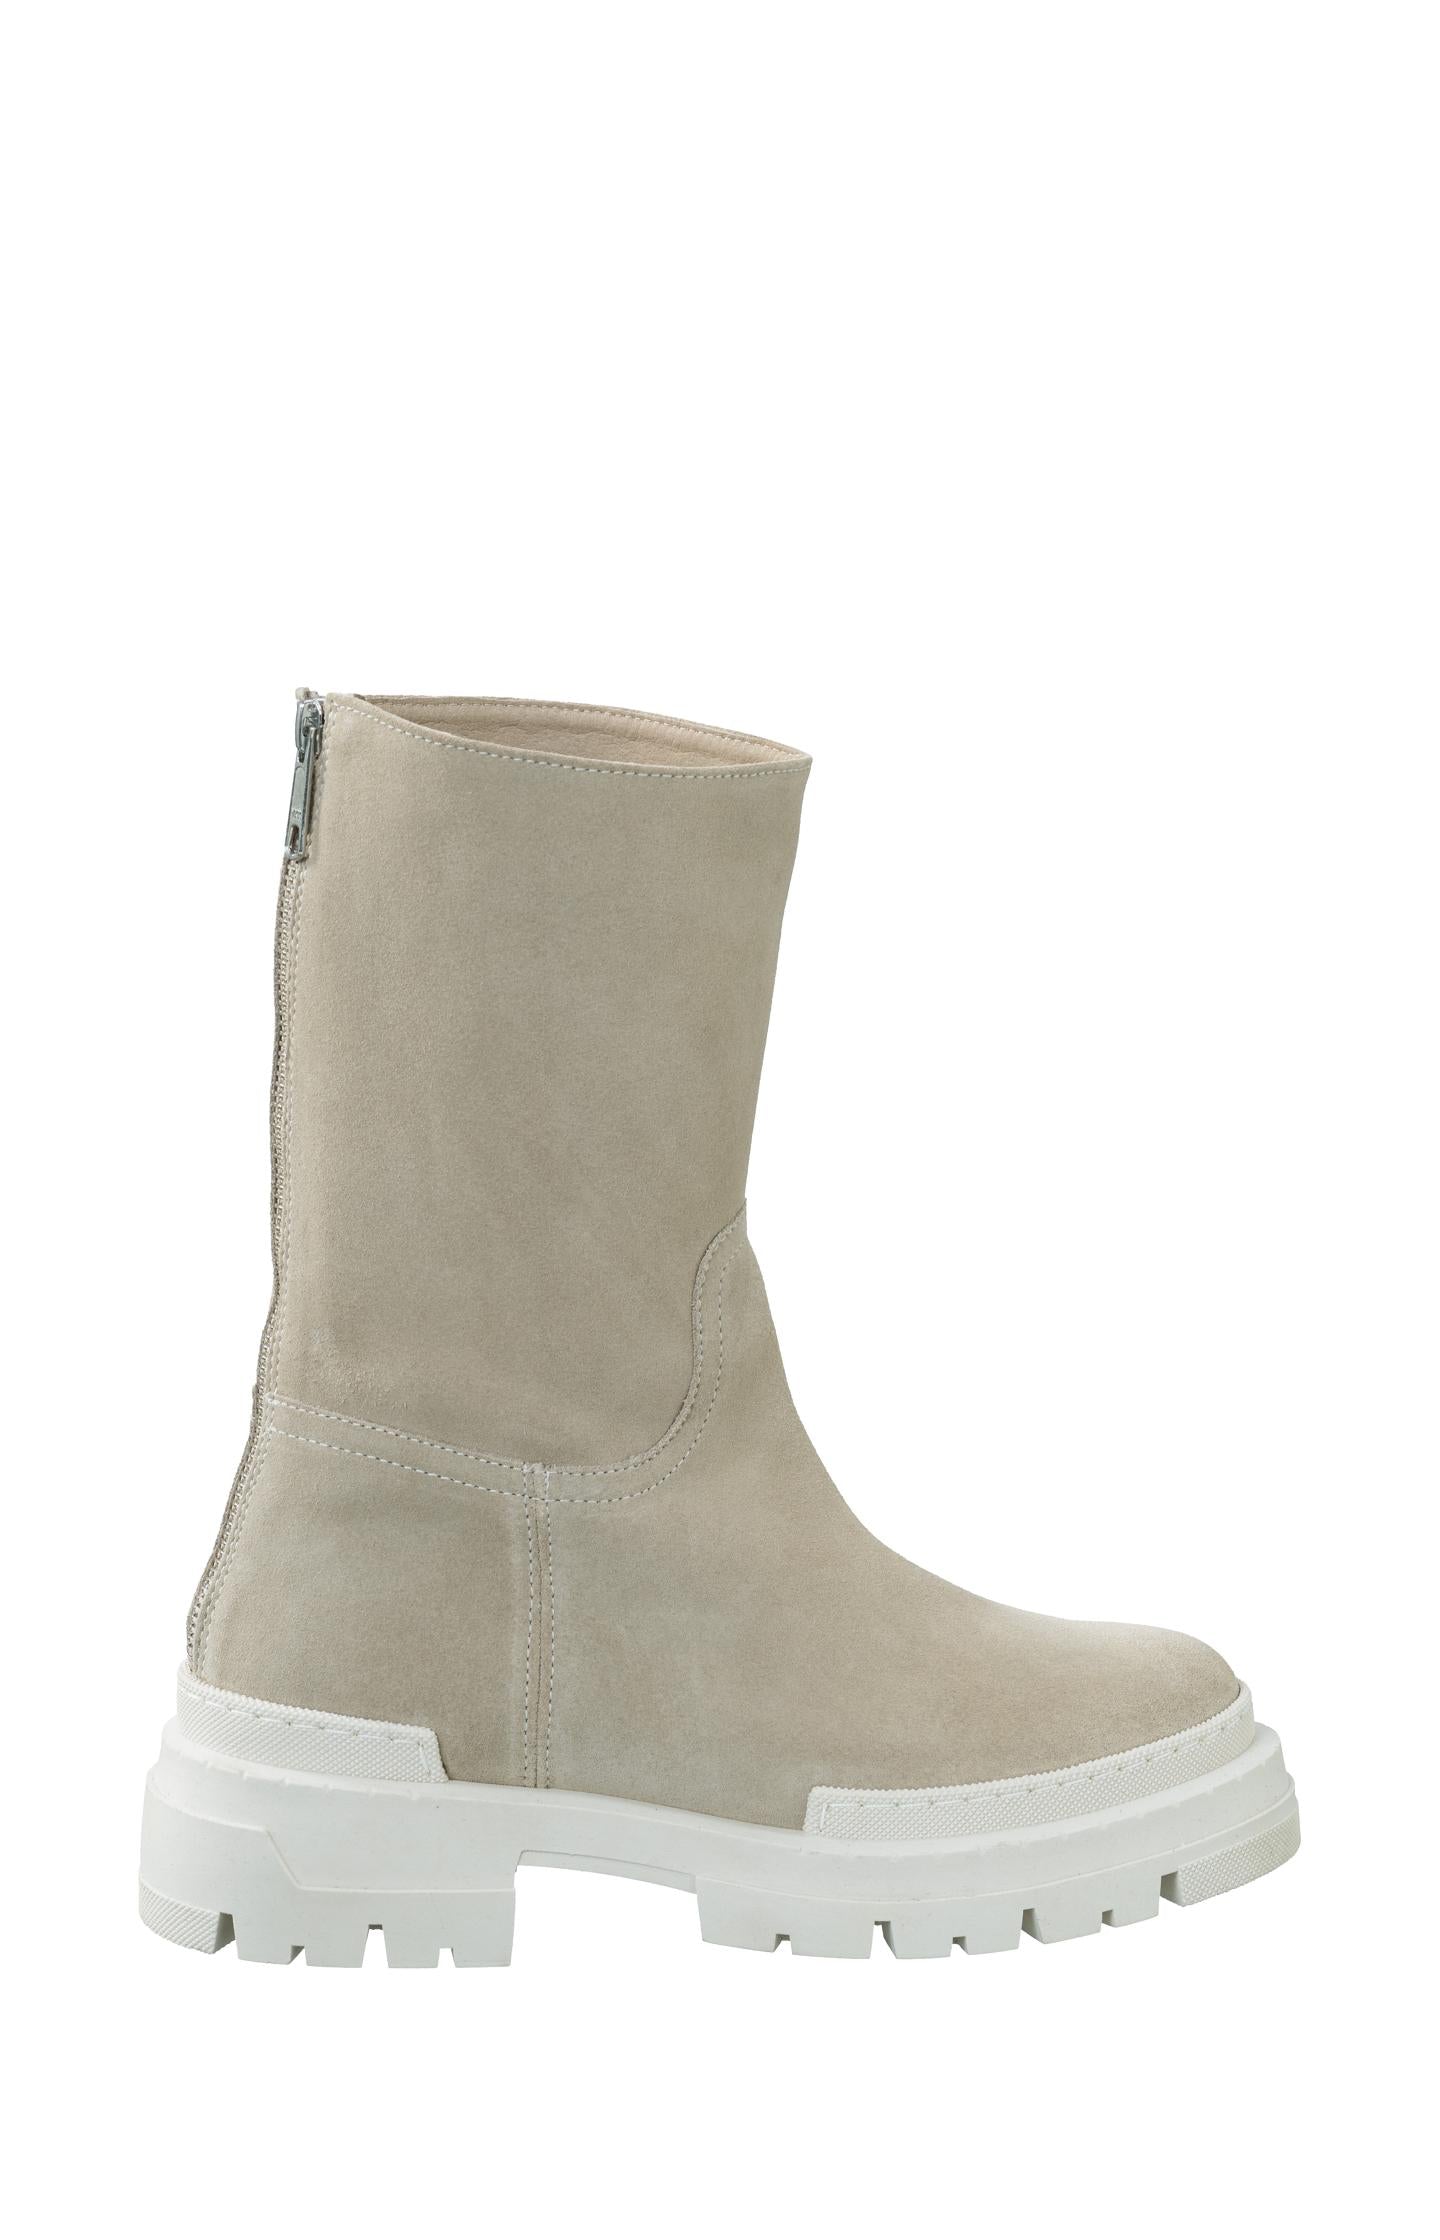 Sturdy suede boots with zipper and rubber soles - Birch Sand